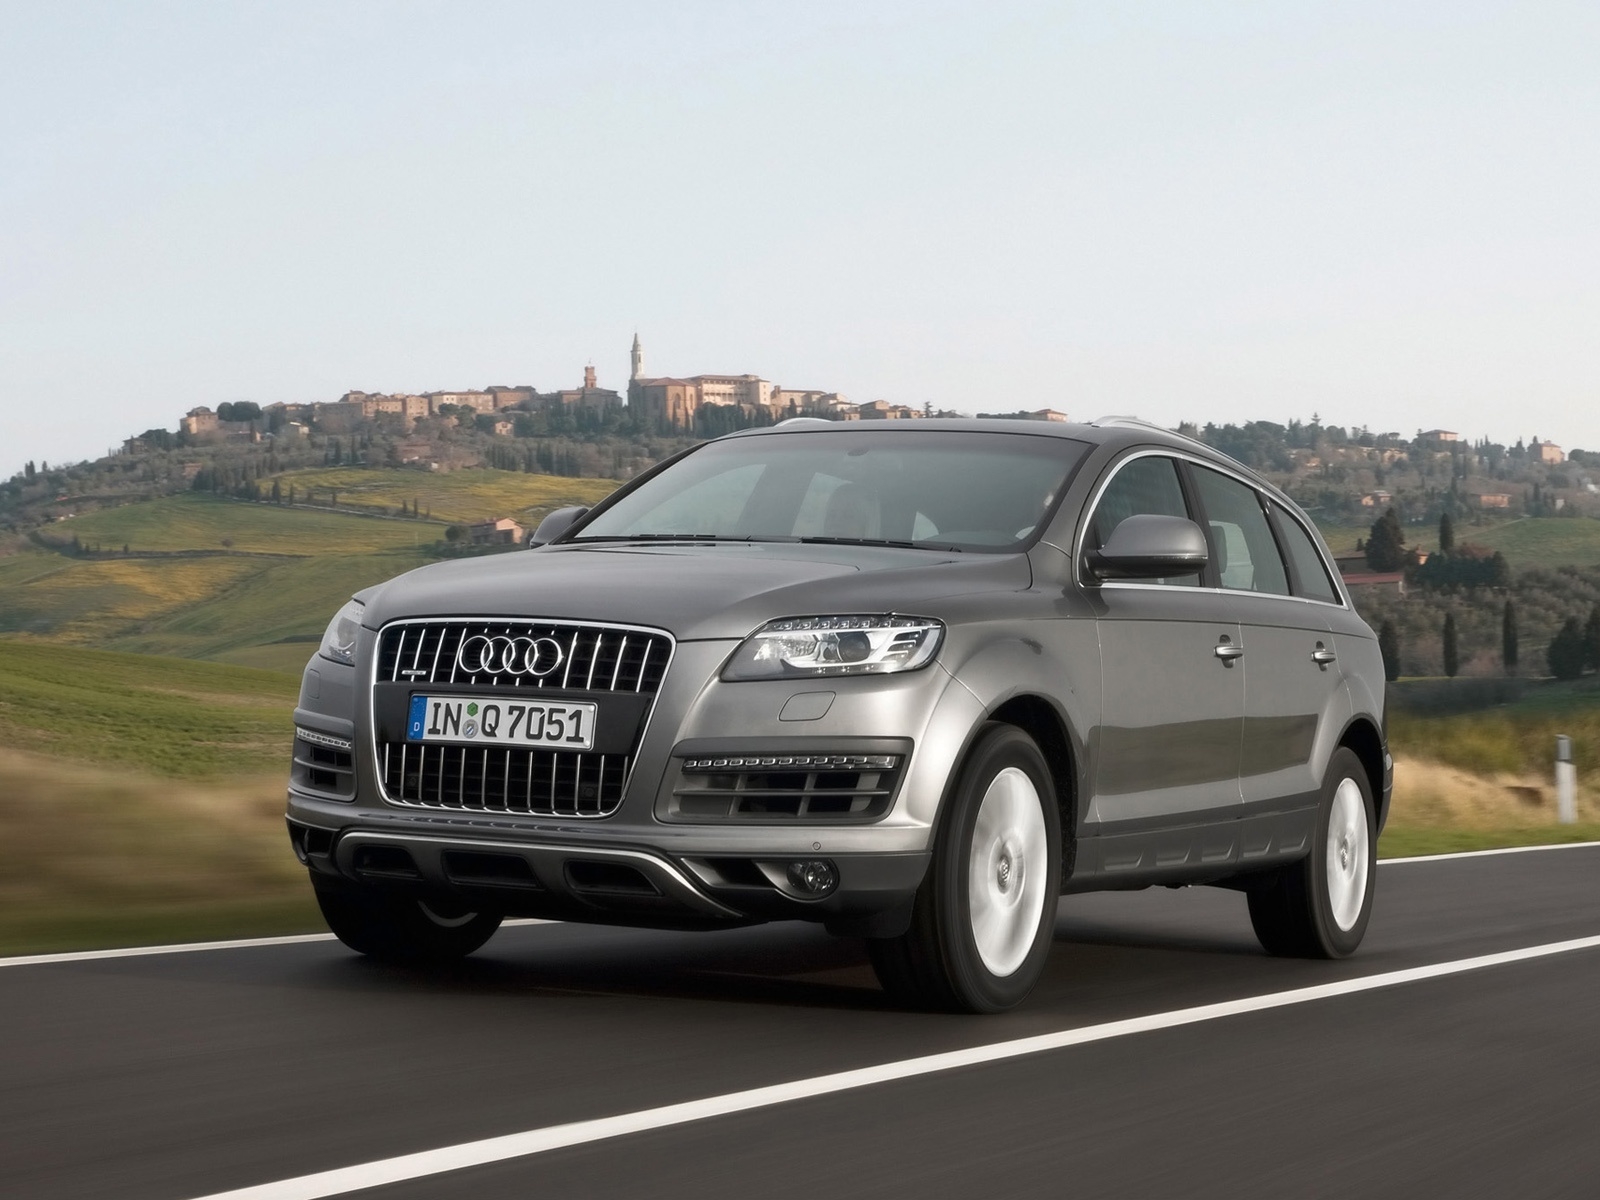 2009 Audi Q7 - Grey Front Angle Speed 1 for 1600 x 1200 resolution